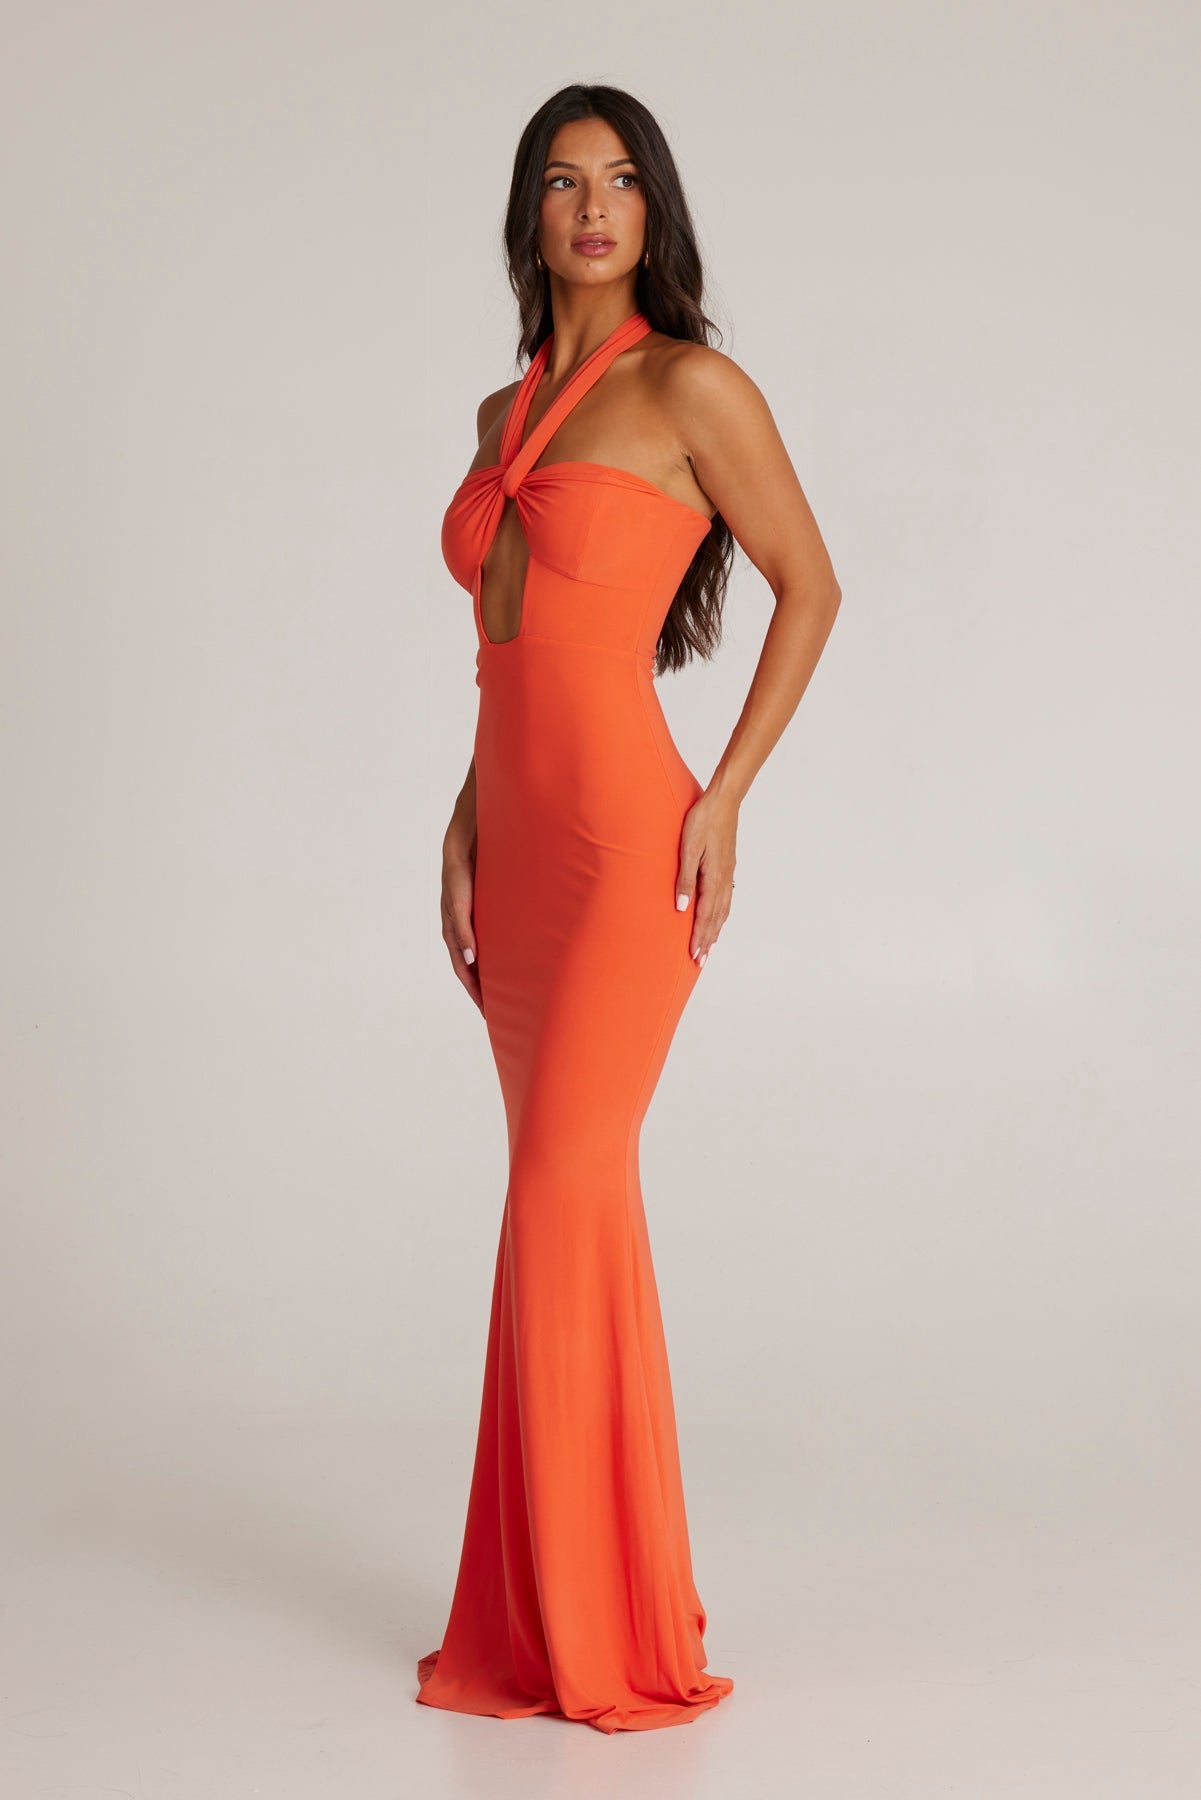 MÉLANI The Label STELLA Coral Key Hole Cut Out Form Fitted Dress